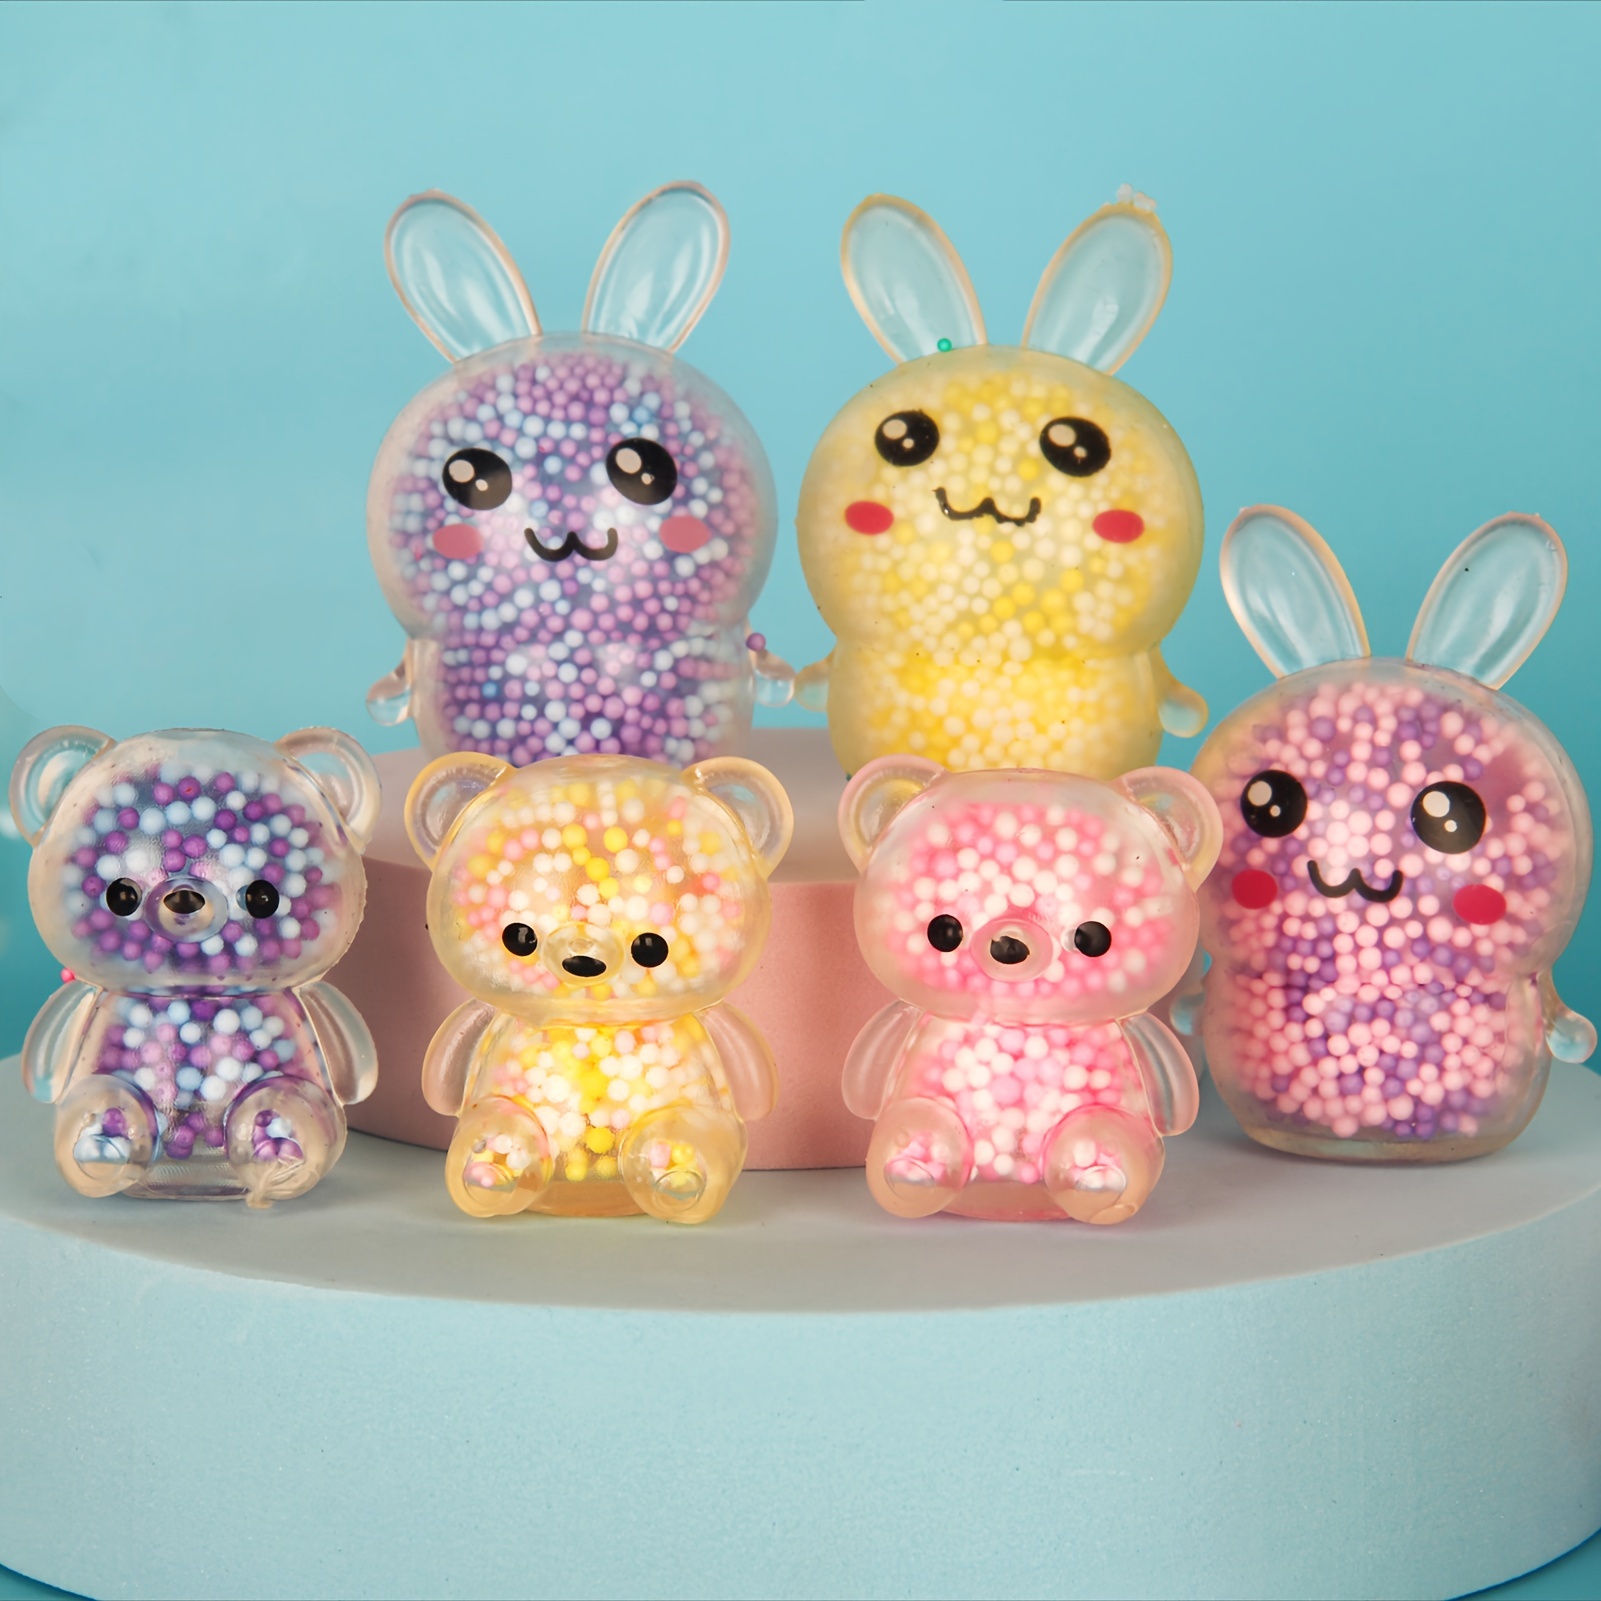 

6pcs Mini Bunny And Bear Squeeze Ball Toys, Toys For Goodie Bag Stuffers, Egg Fillers, Party Favors Gifts, Random Color